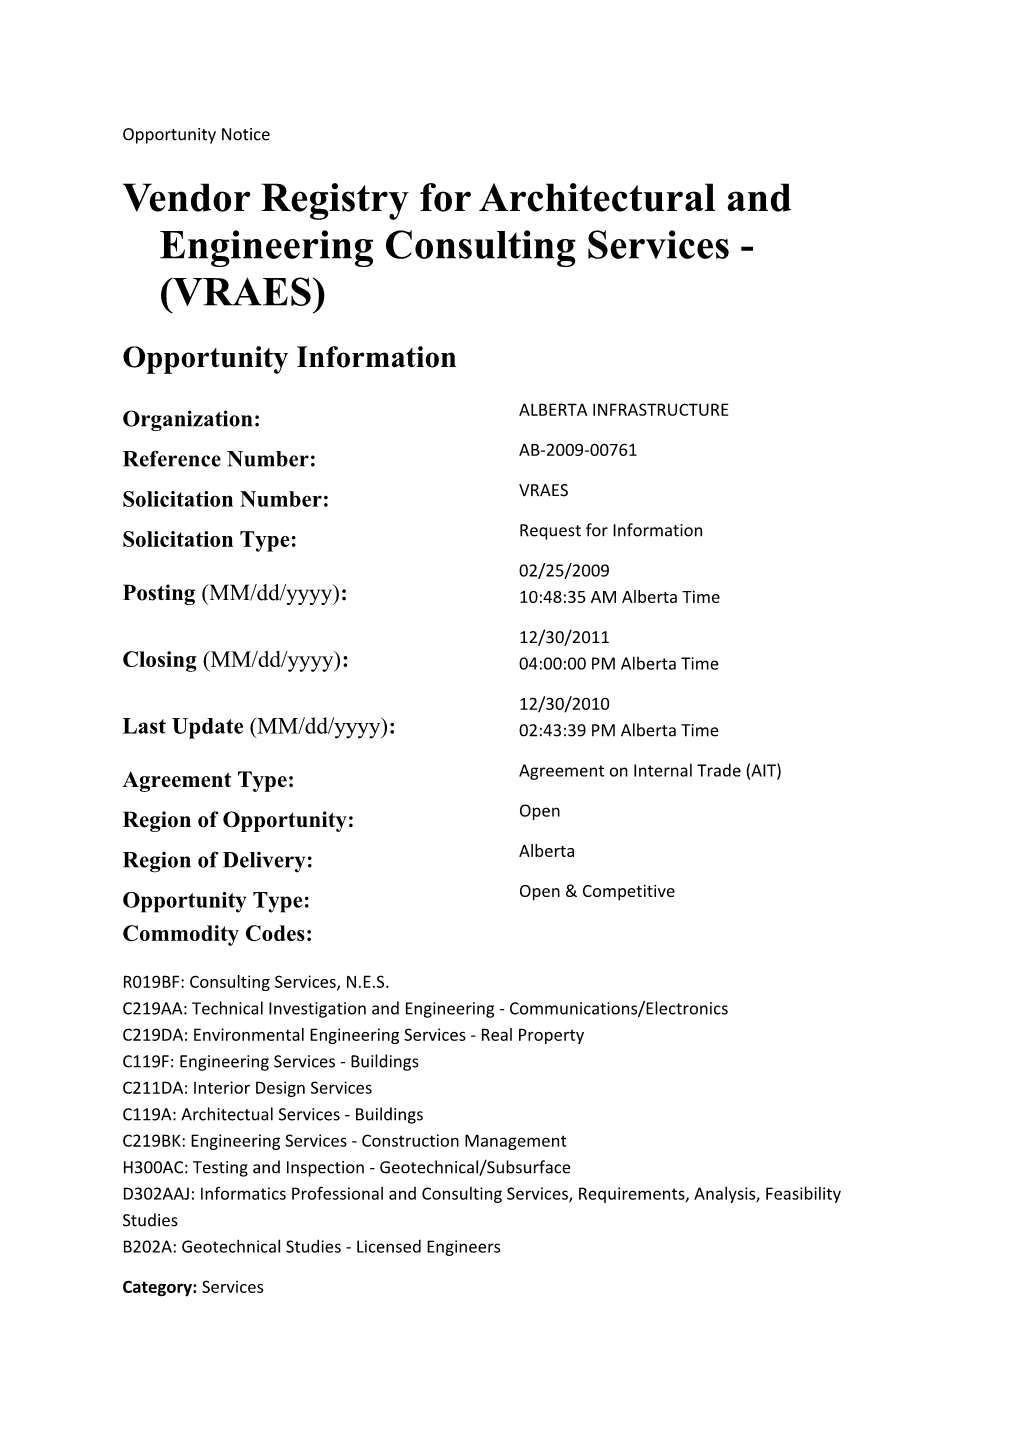 Vendor Registry for Architectural and Engineering Consulting Services - (VRAES)